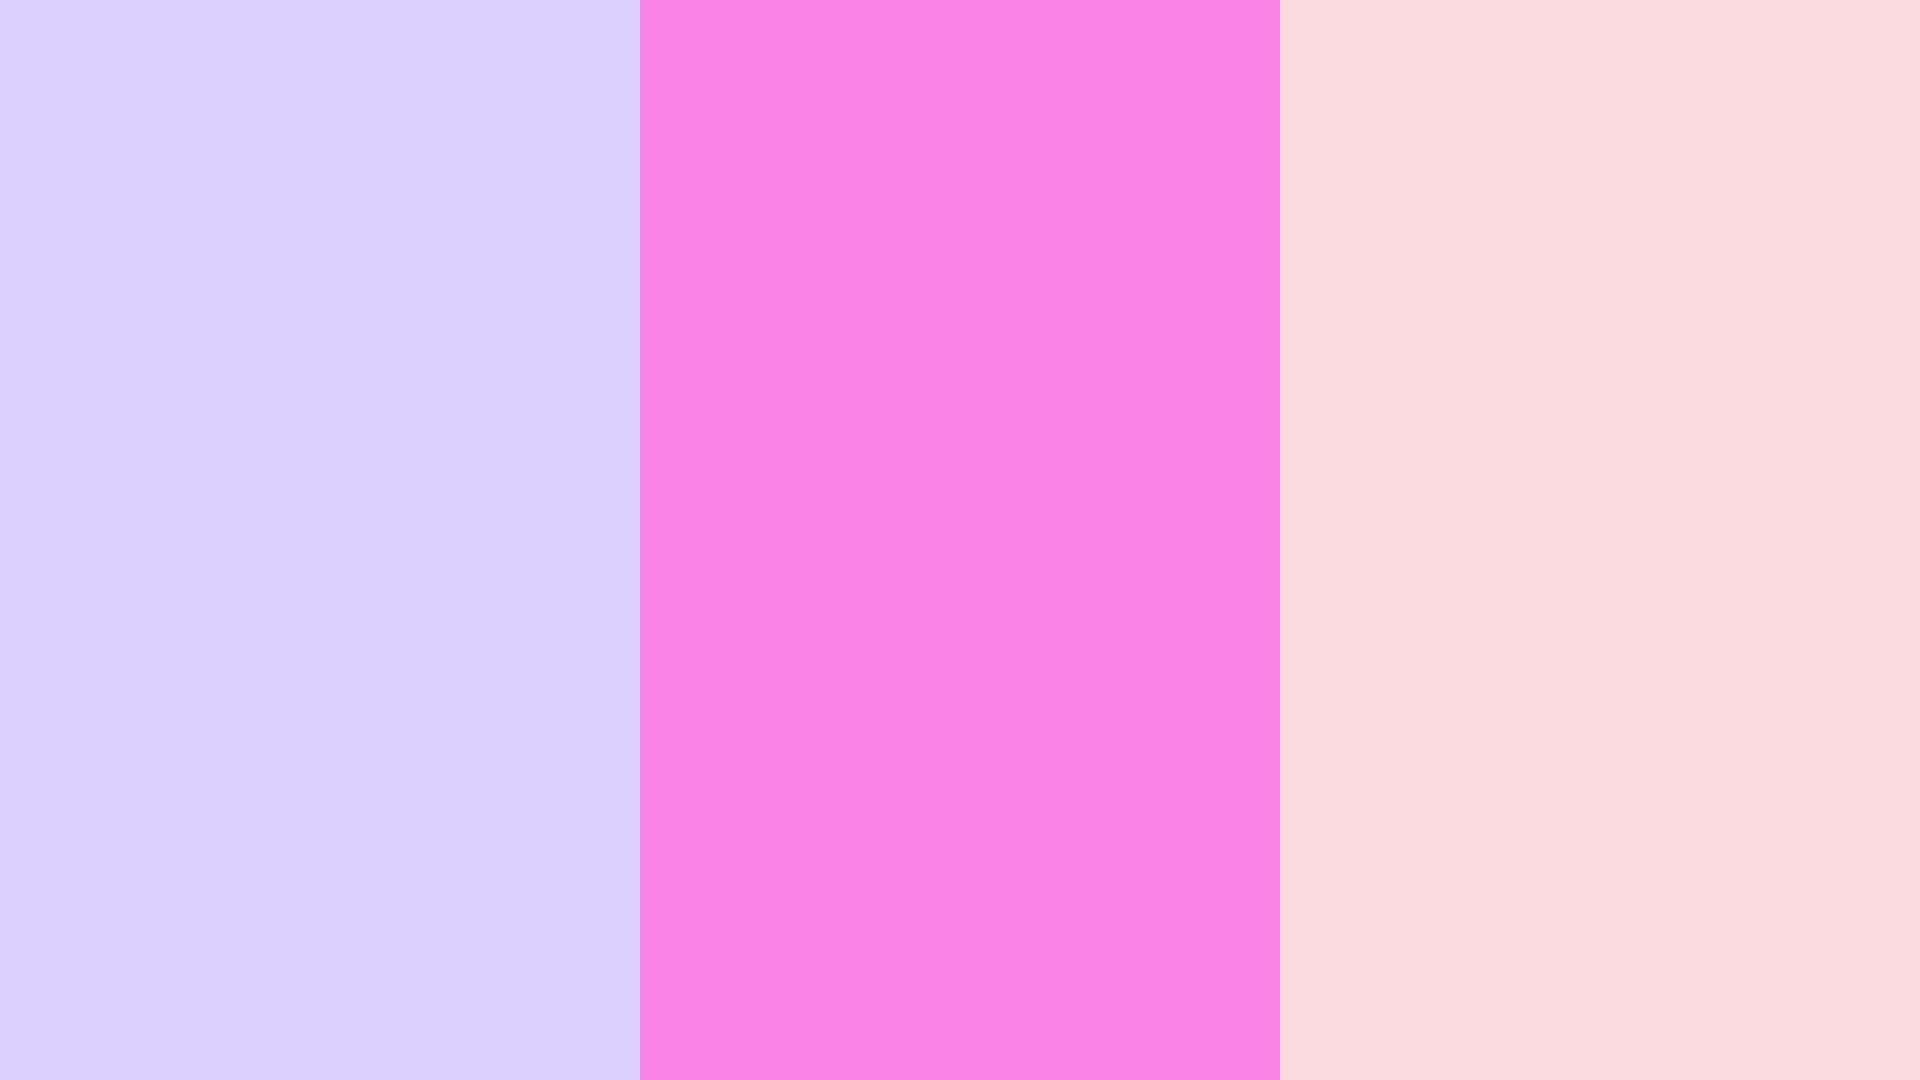 Pale Lavender Pale Magenta and Pale Pink solid three color background